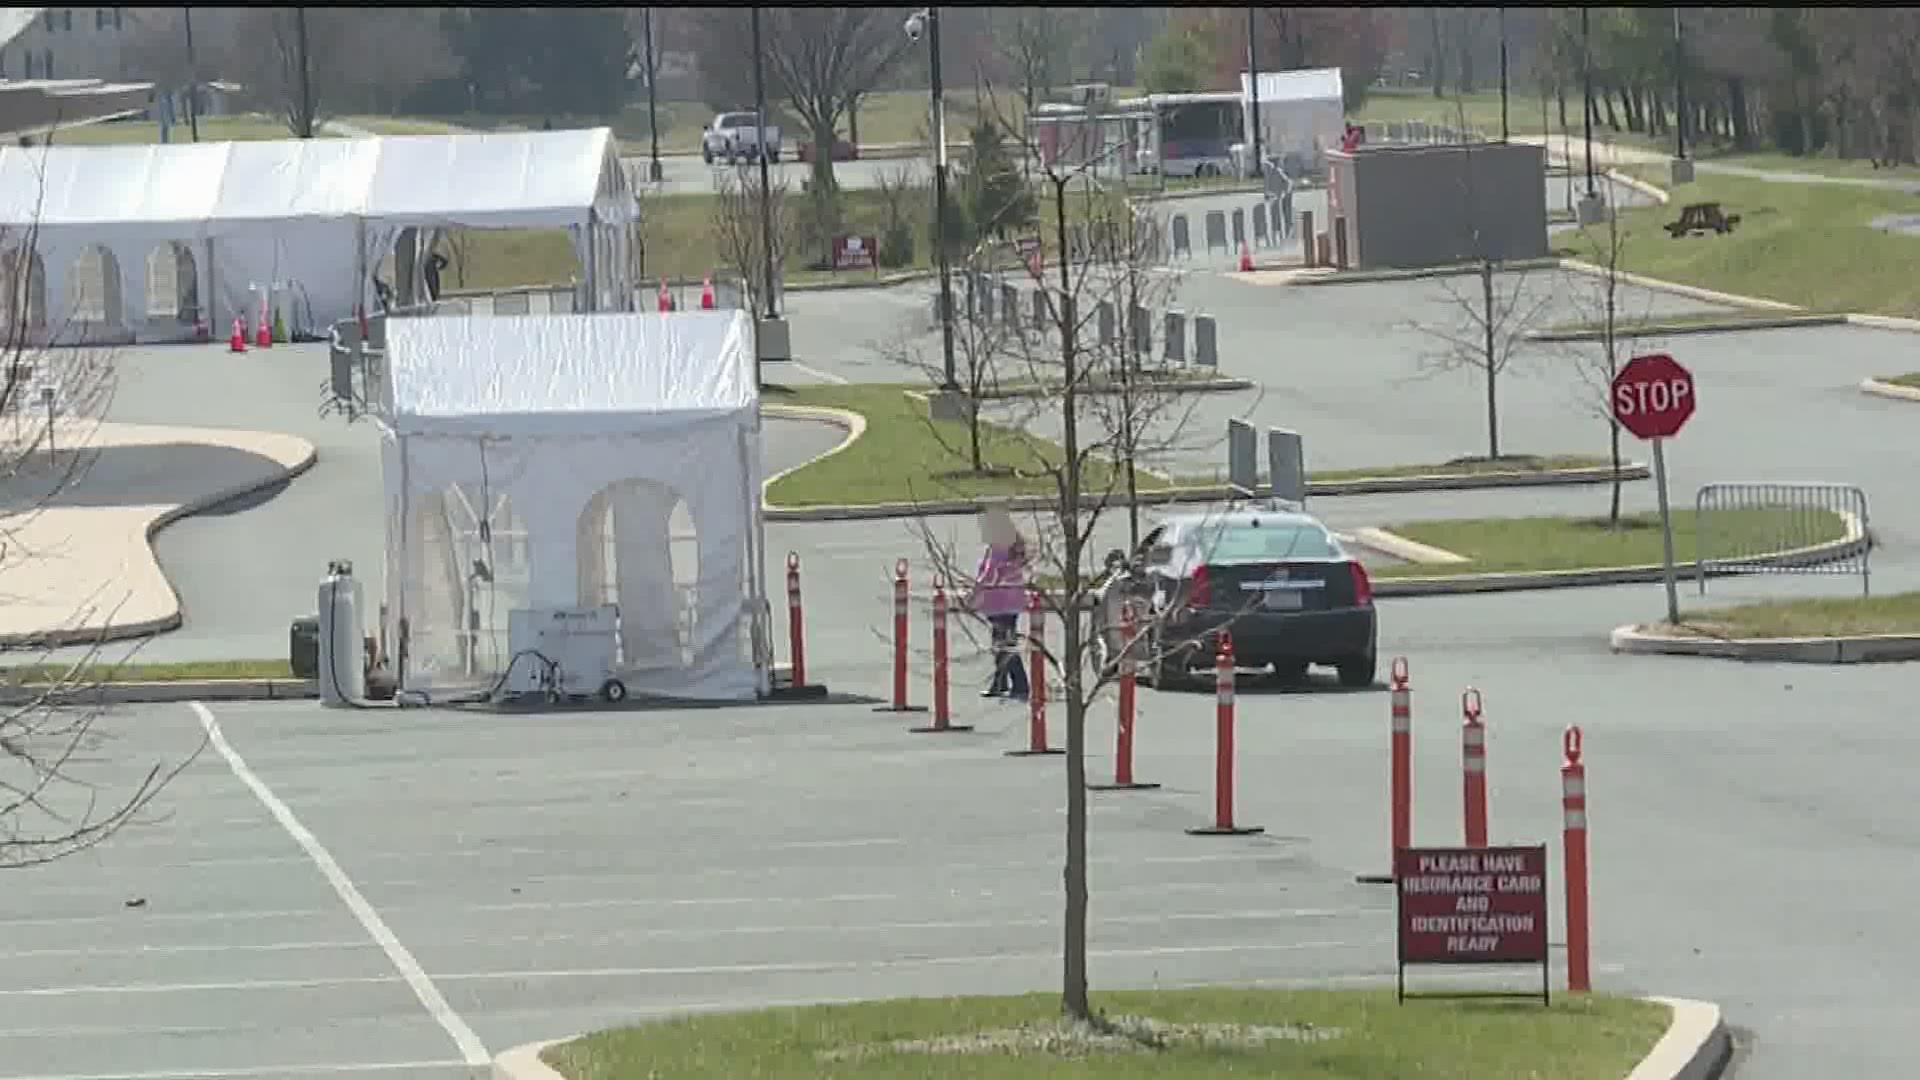 COVID-19 testing has ramped up in Lancaster County. Penn Medicine Lancaster General Health has set up an outdoor patient screening and testing area.